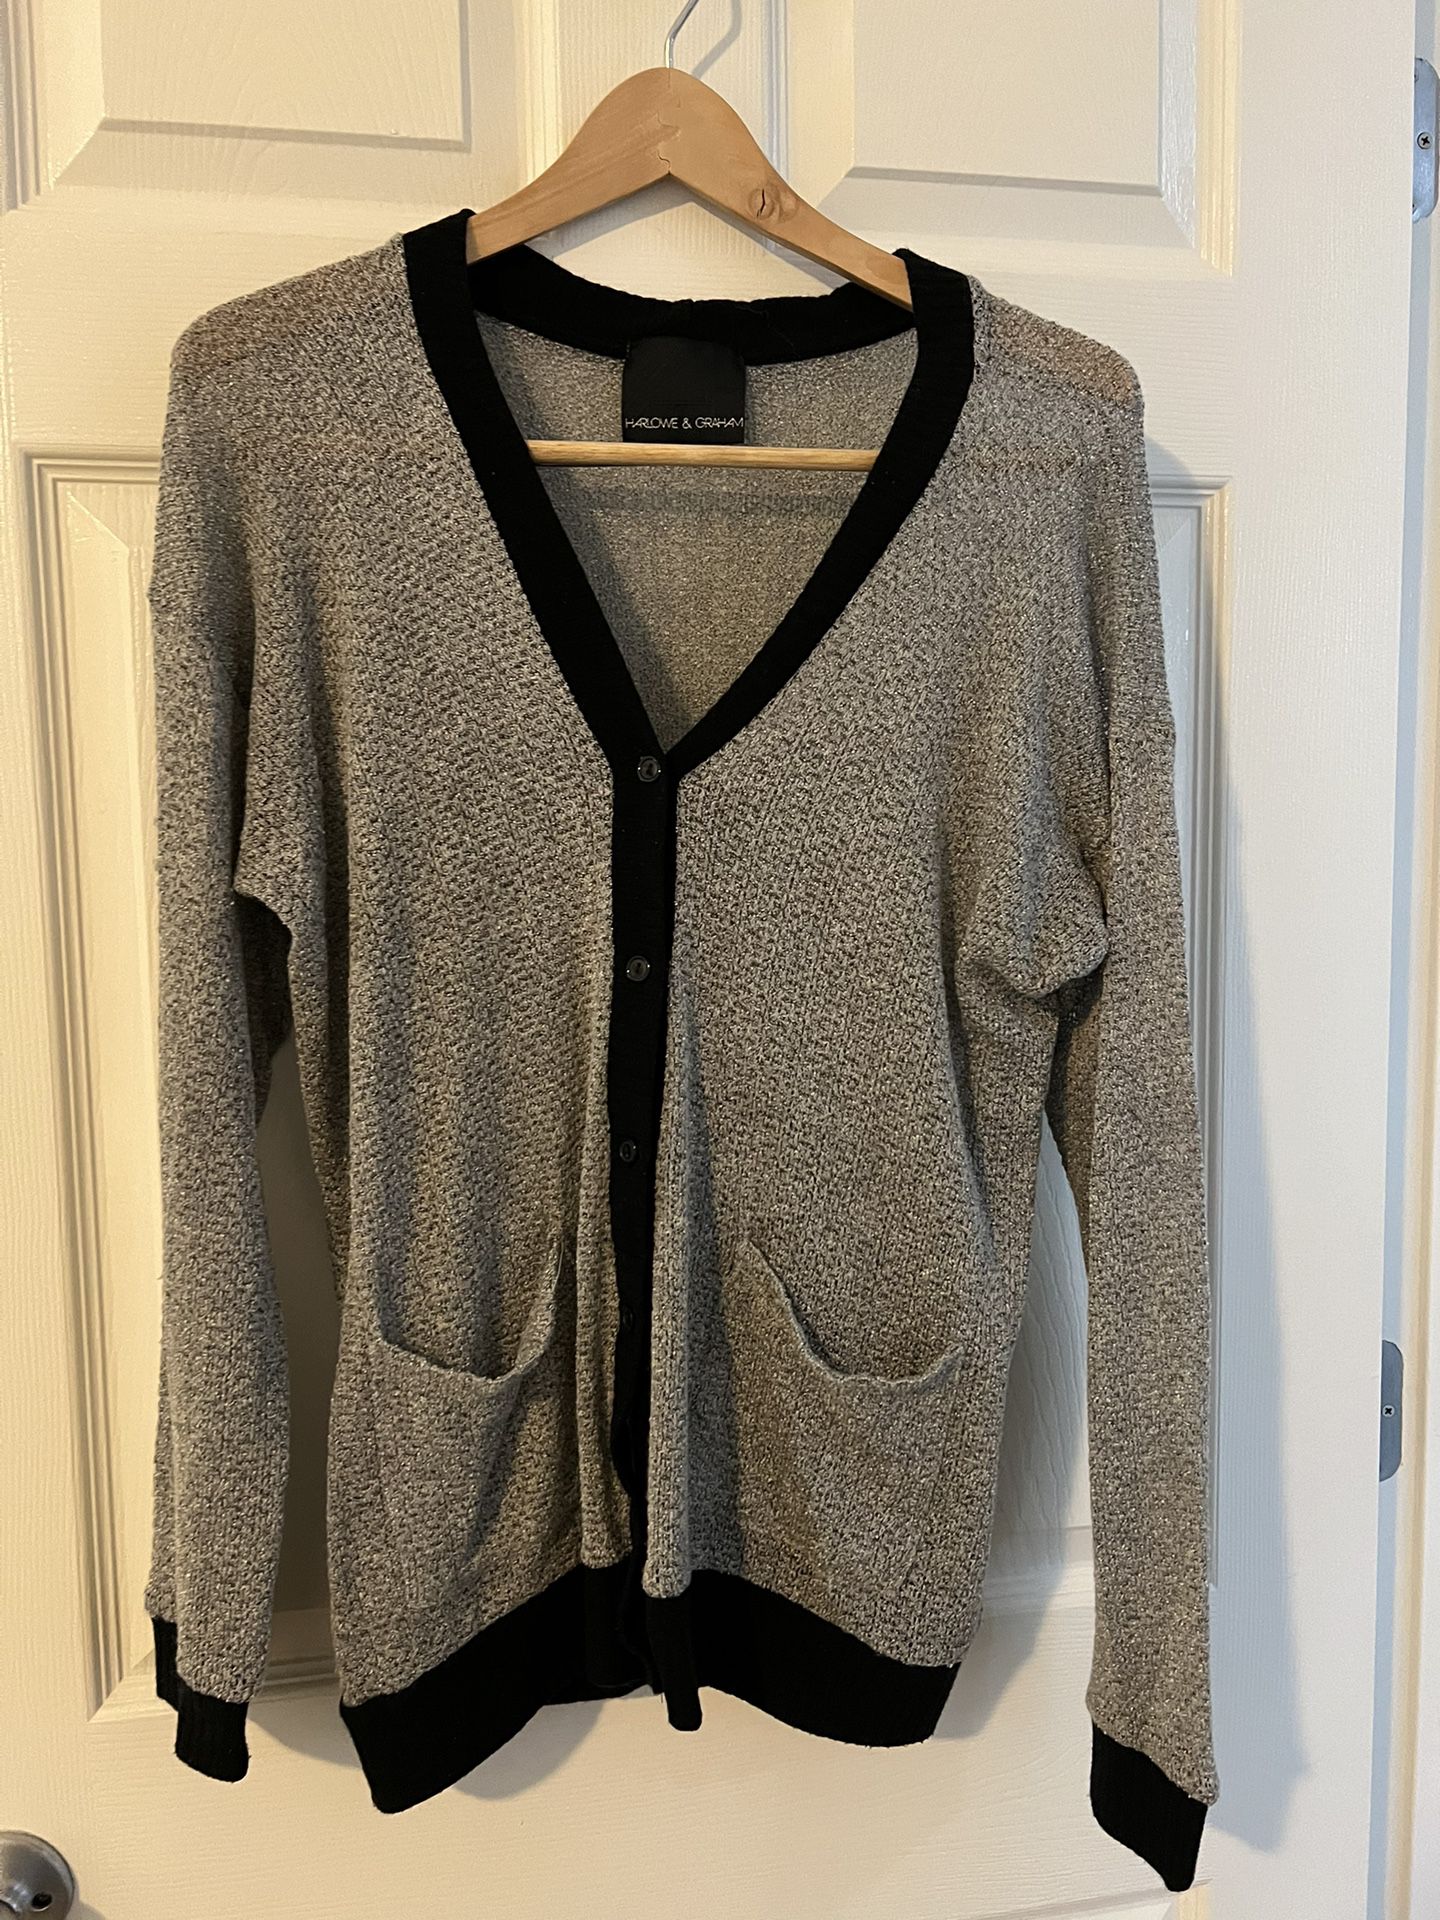 Harlowe & Graham Women Silver Gray Lightweight Cardigan w/ Black Trim Large EUC  Gorgeous.  I would describe this cardigan as ethereal.  It is lightwe